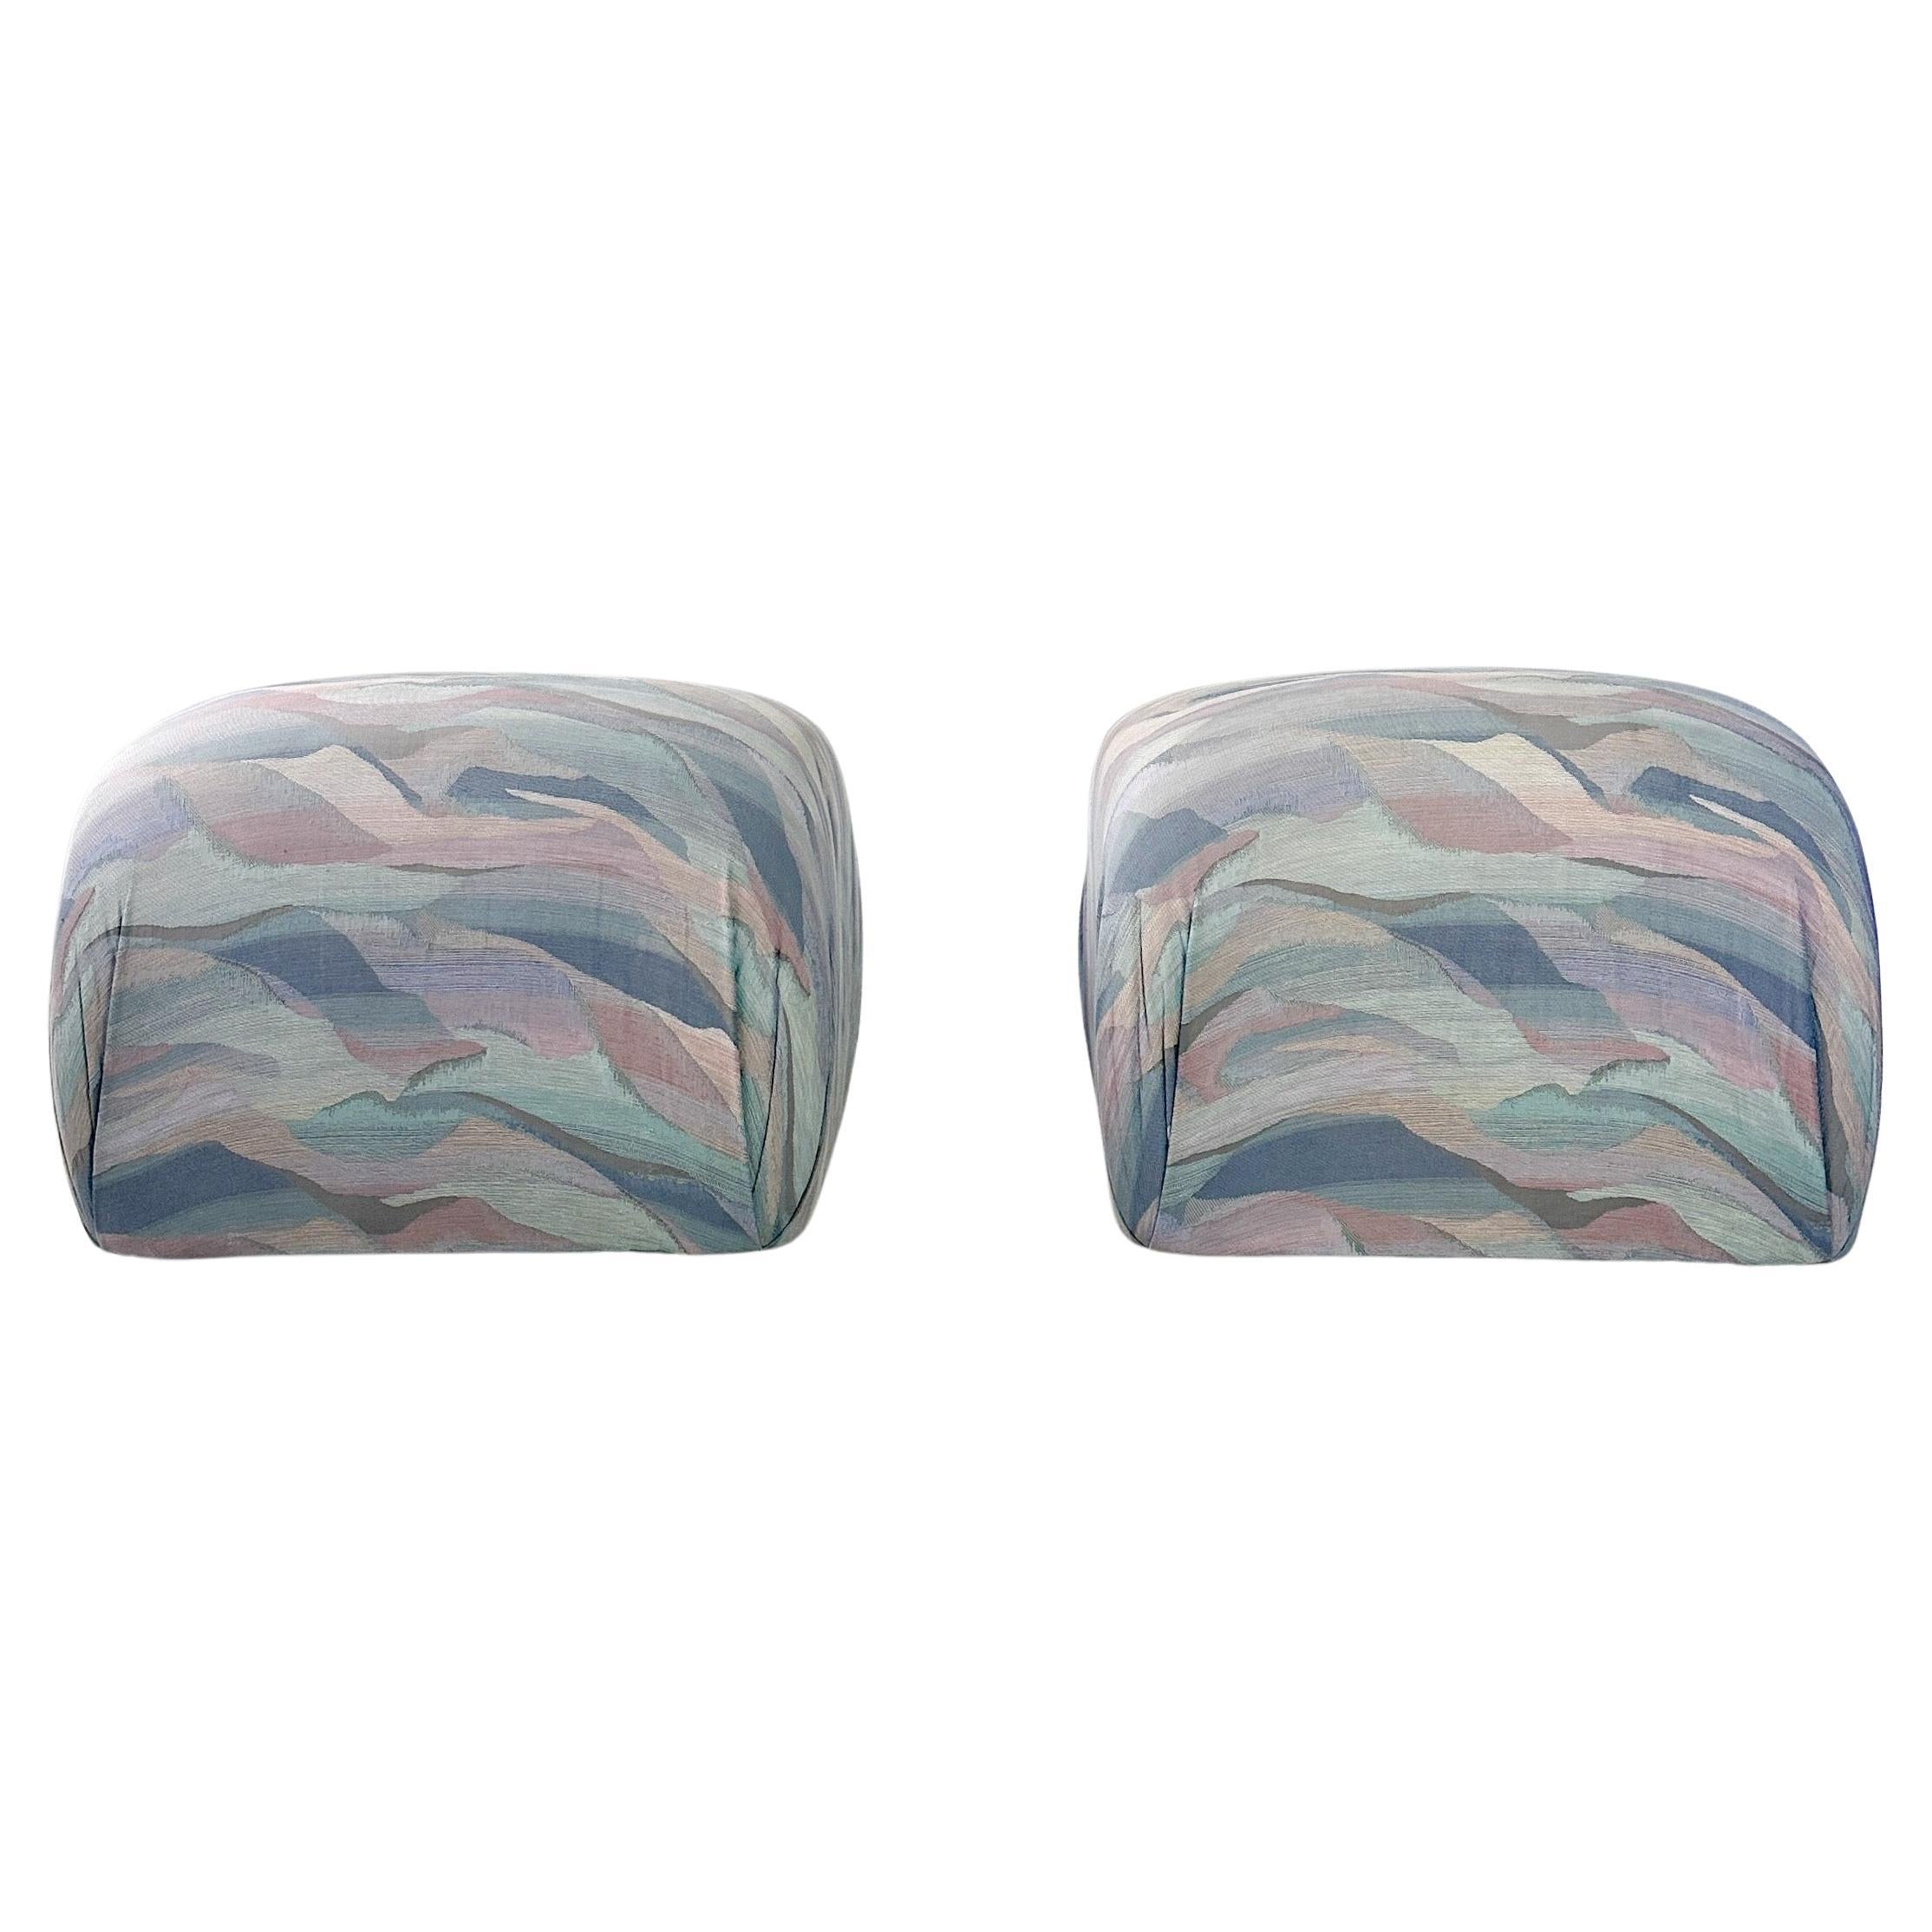 Karl Springer Attributed Souffle Pouf Ottoman Pair For Sale